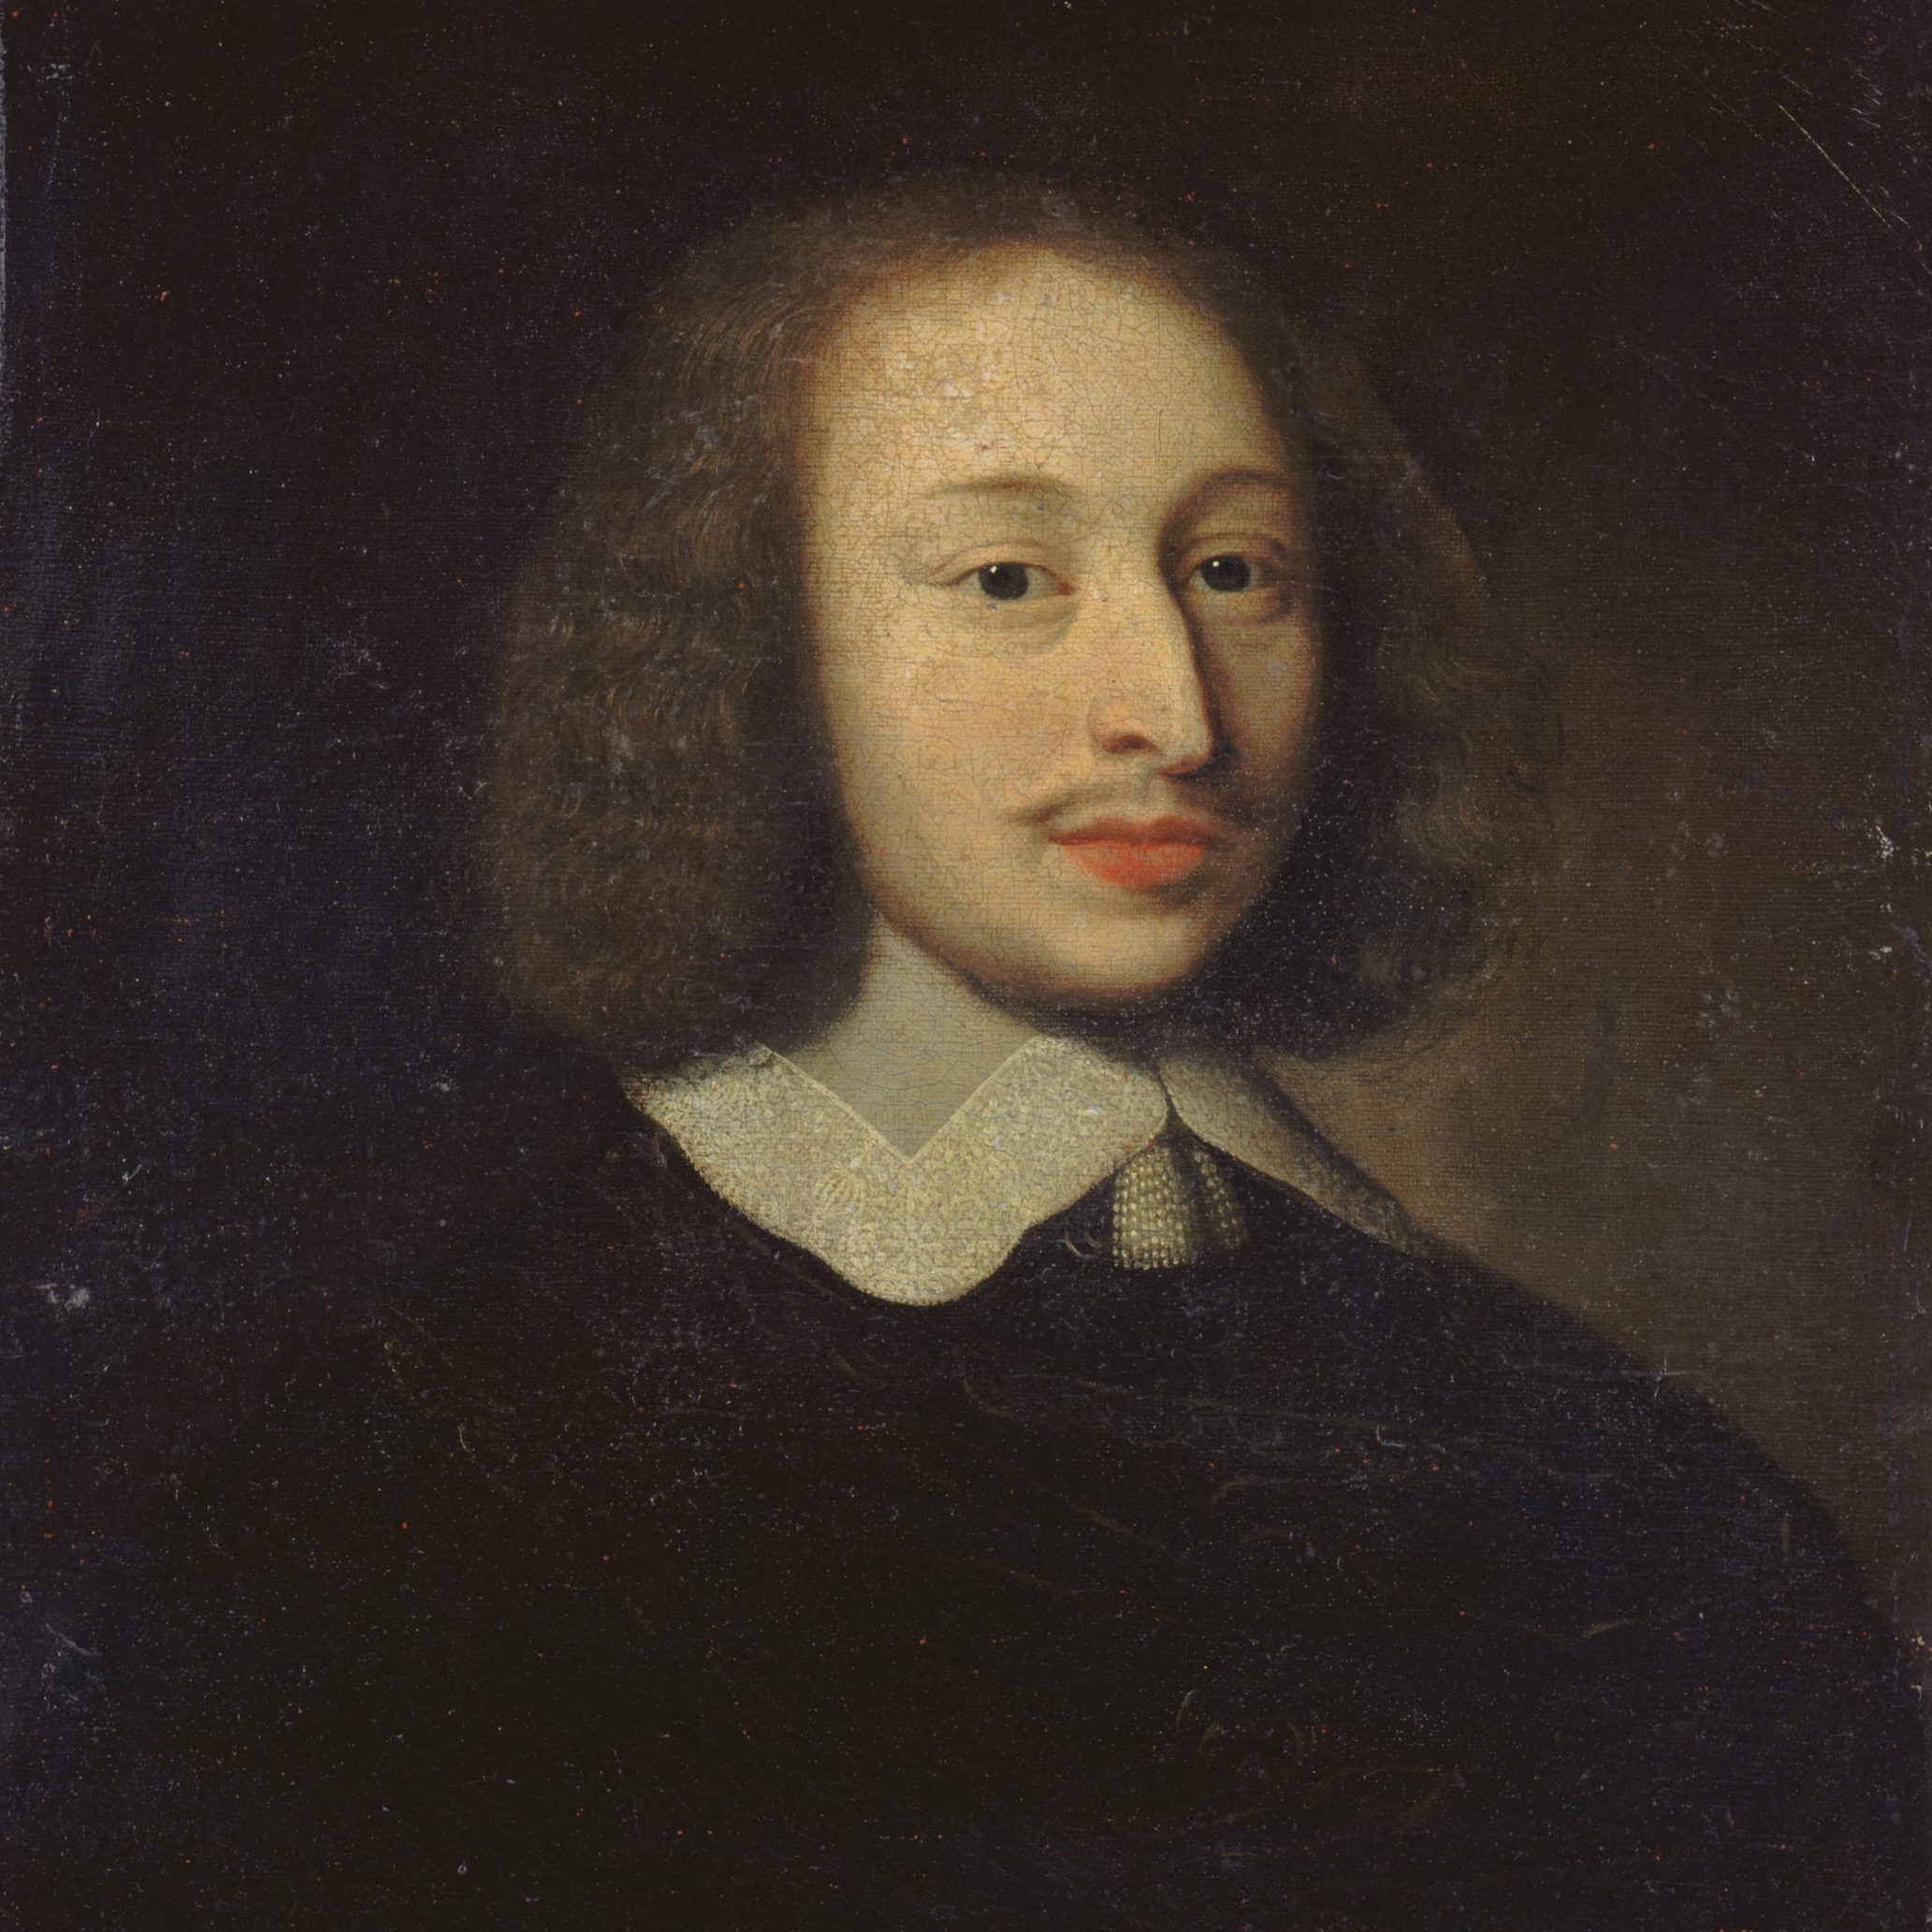 Portrait Thought To Be Of Blaise Pascal (1623-1662)